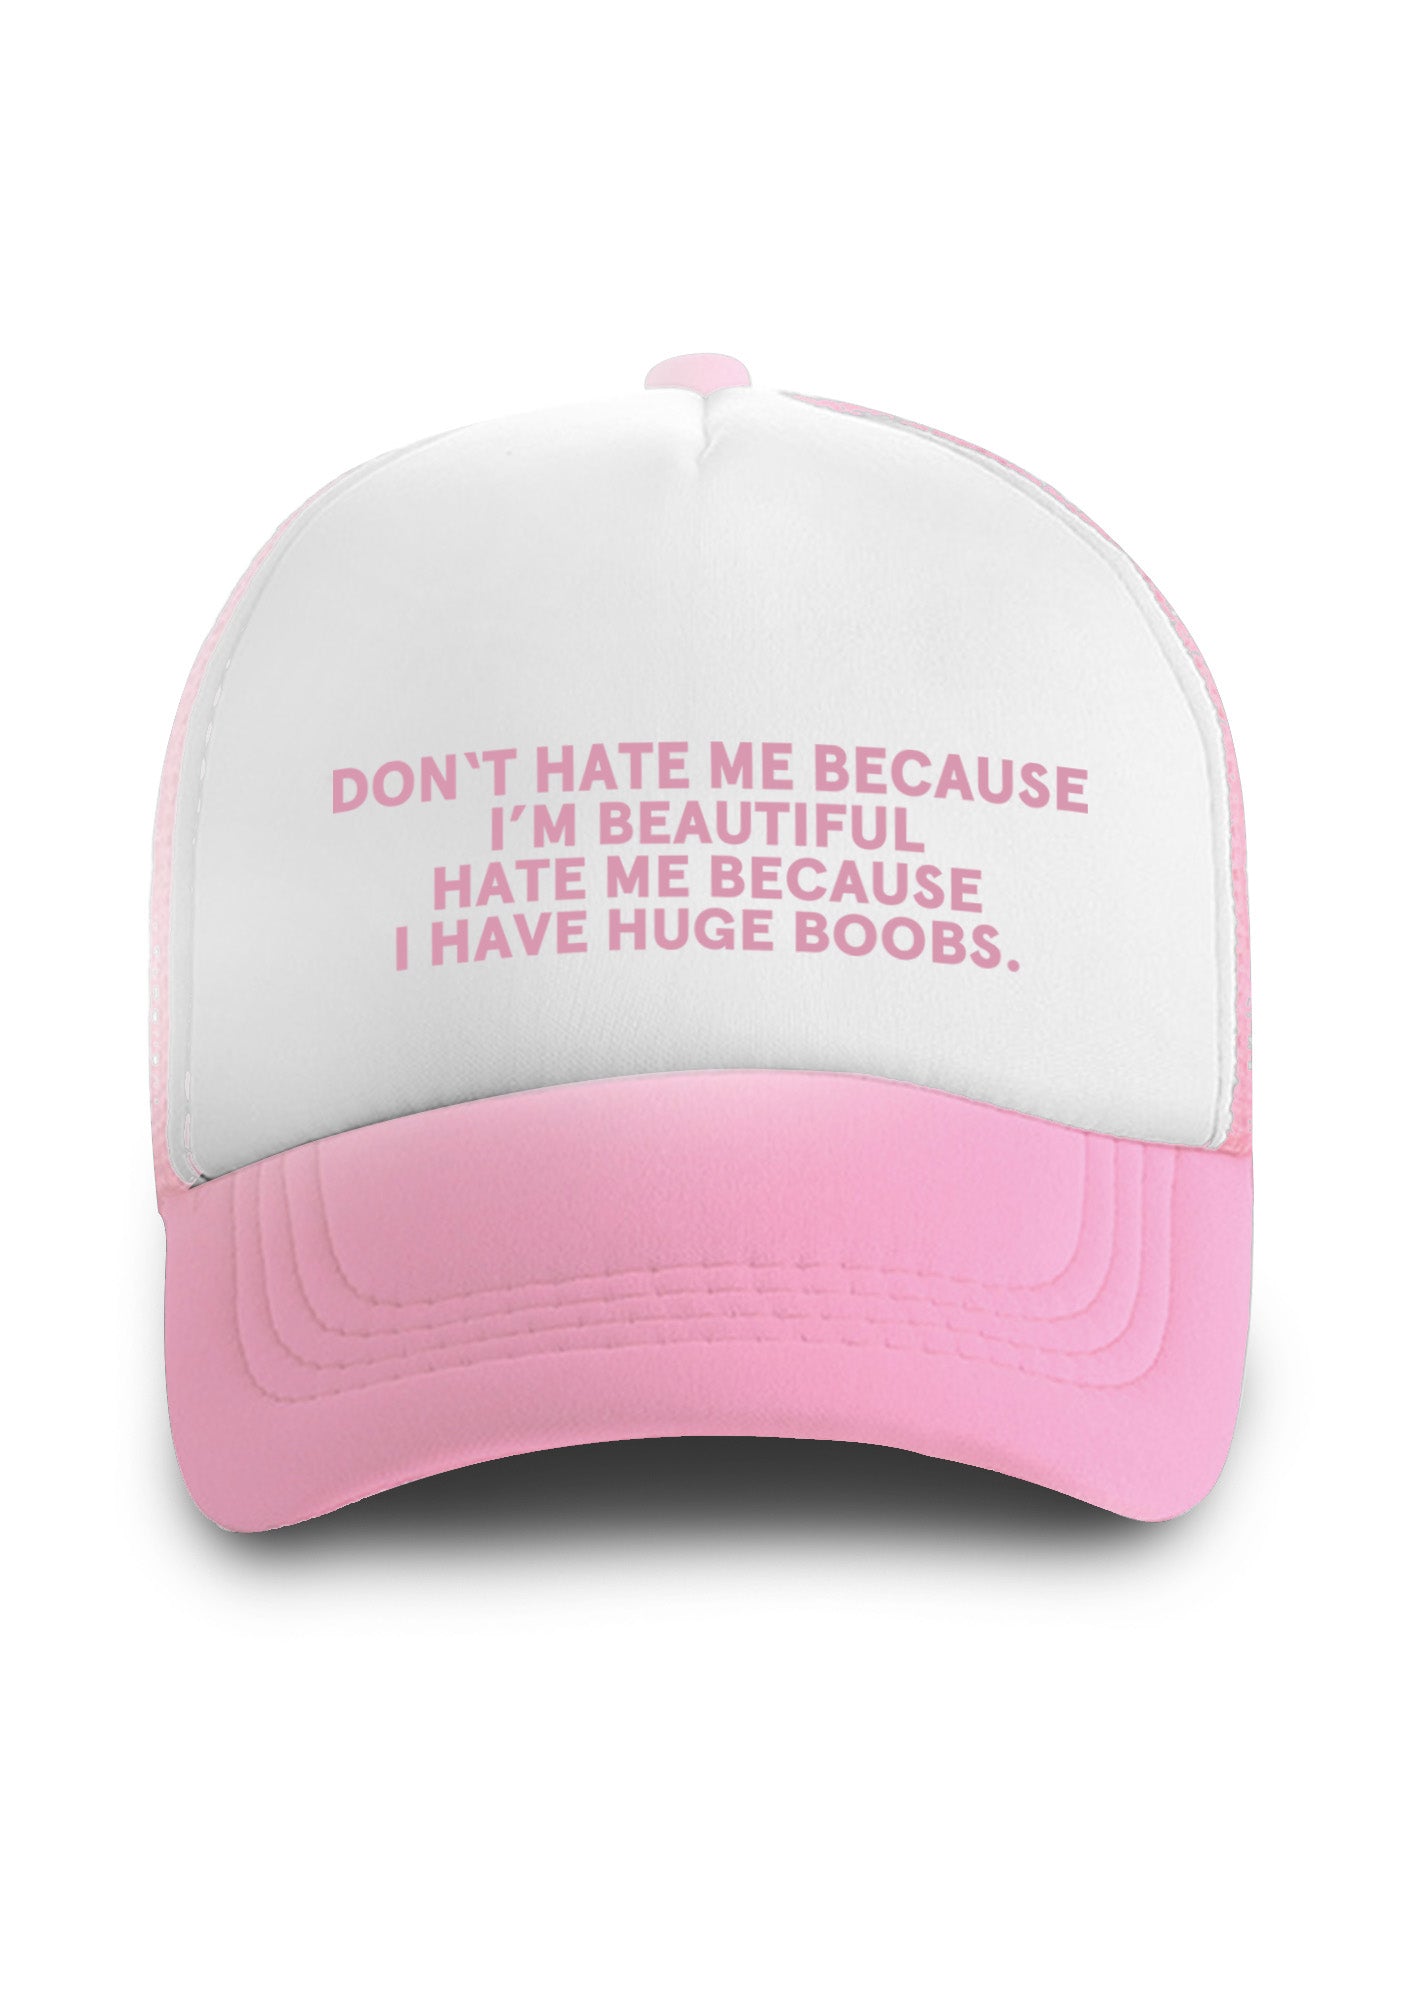 Hate Me Because I Have Huge Bxxbs Trucker Hat